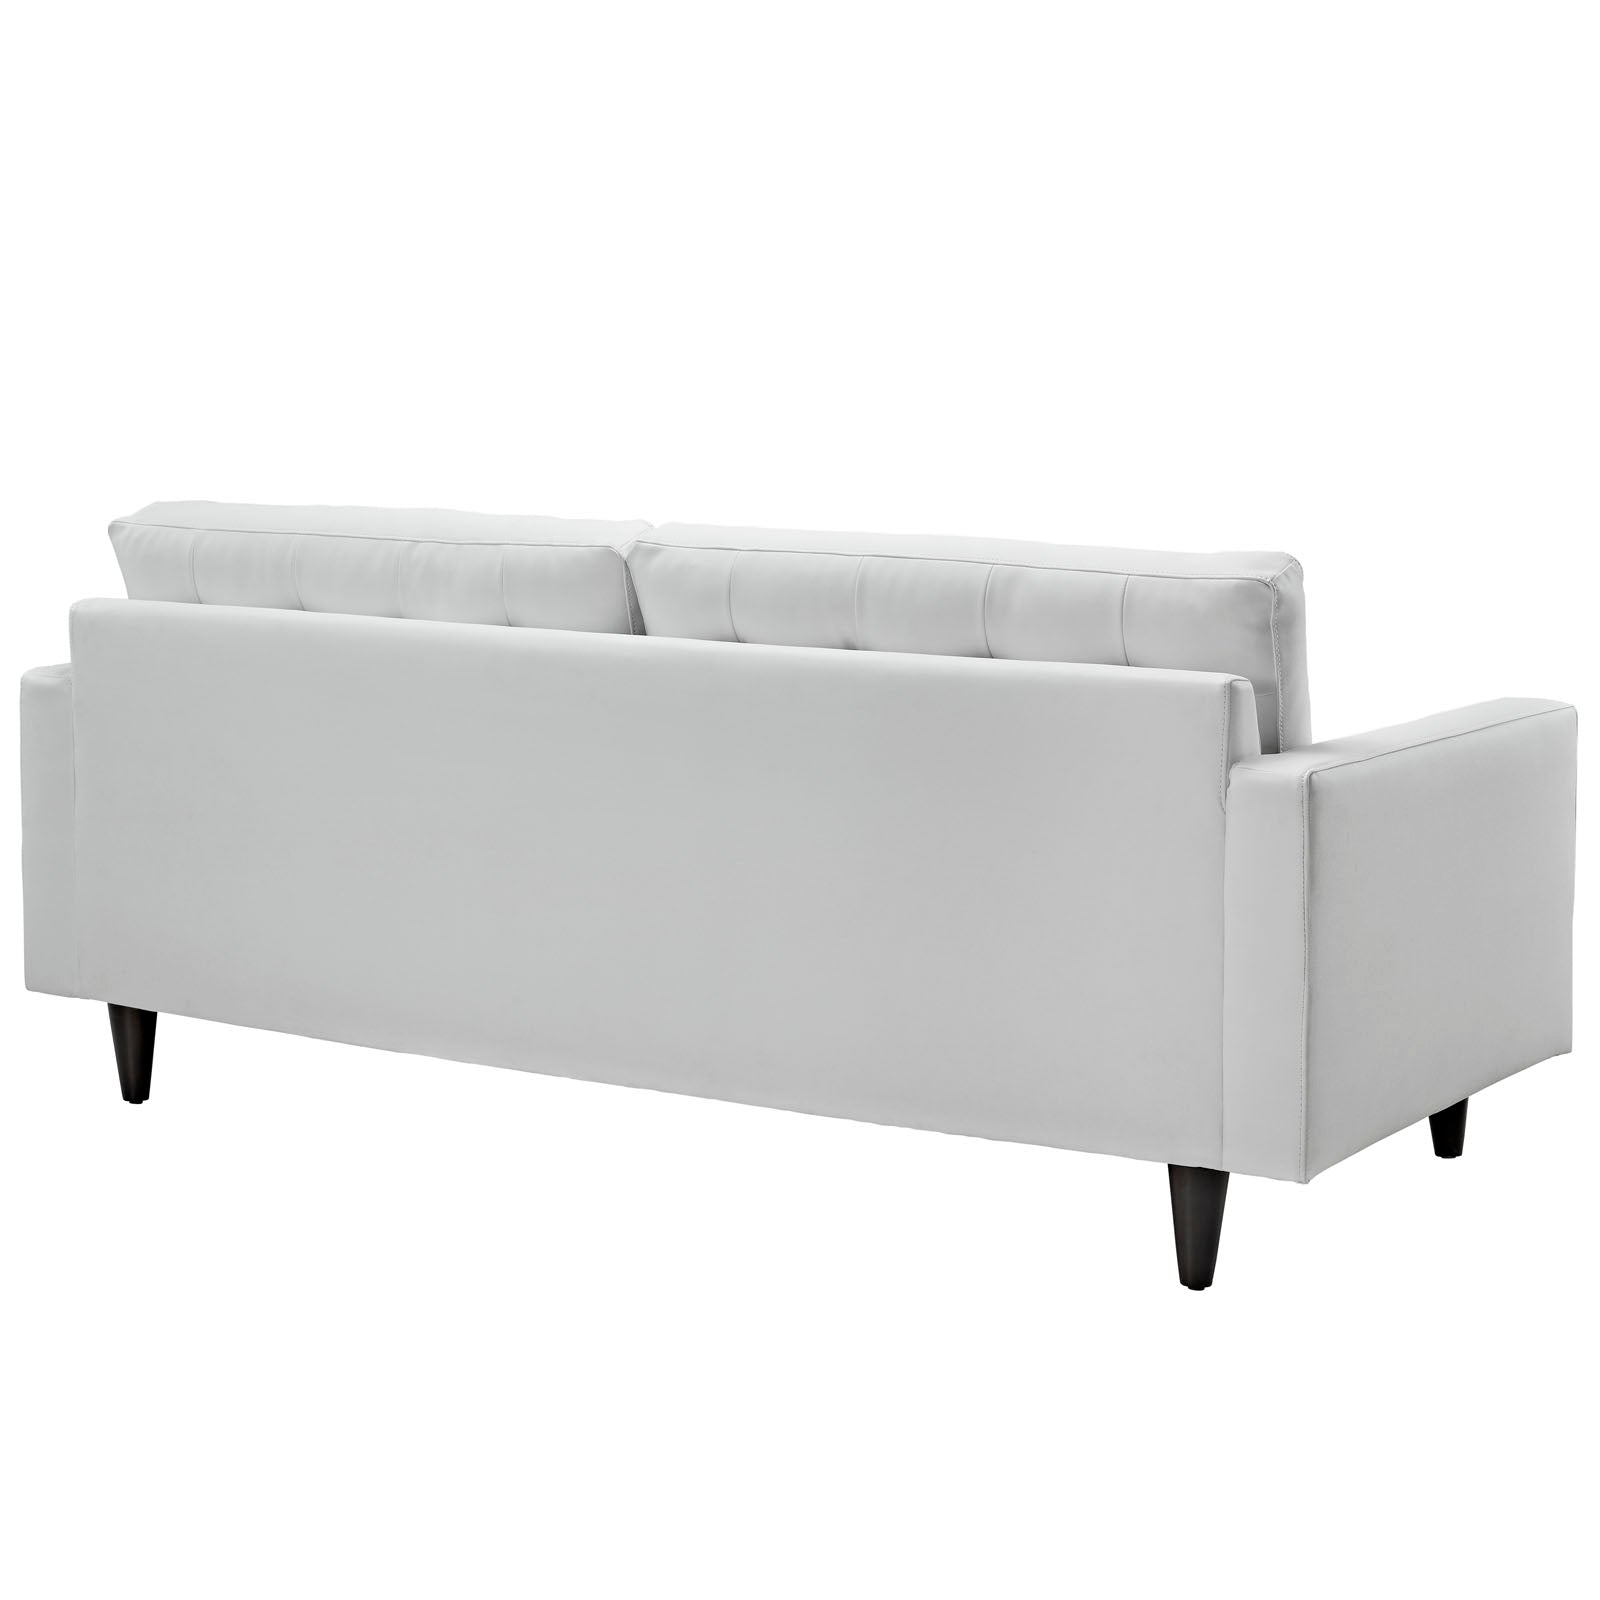 Modway Living Room Sets - Empress Sofa and Armchair Set of 2 White